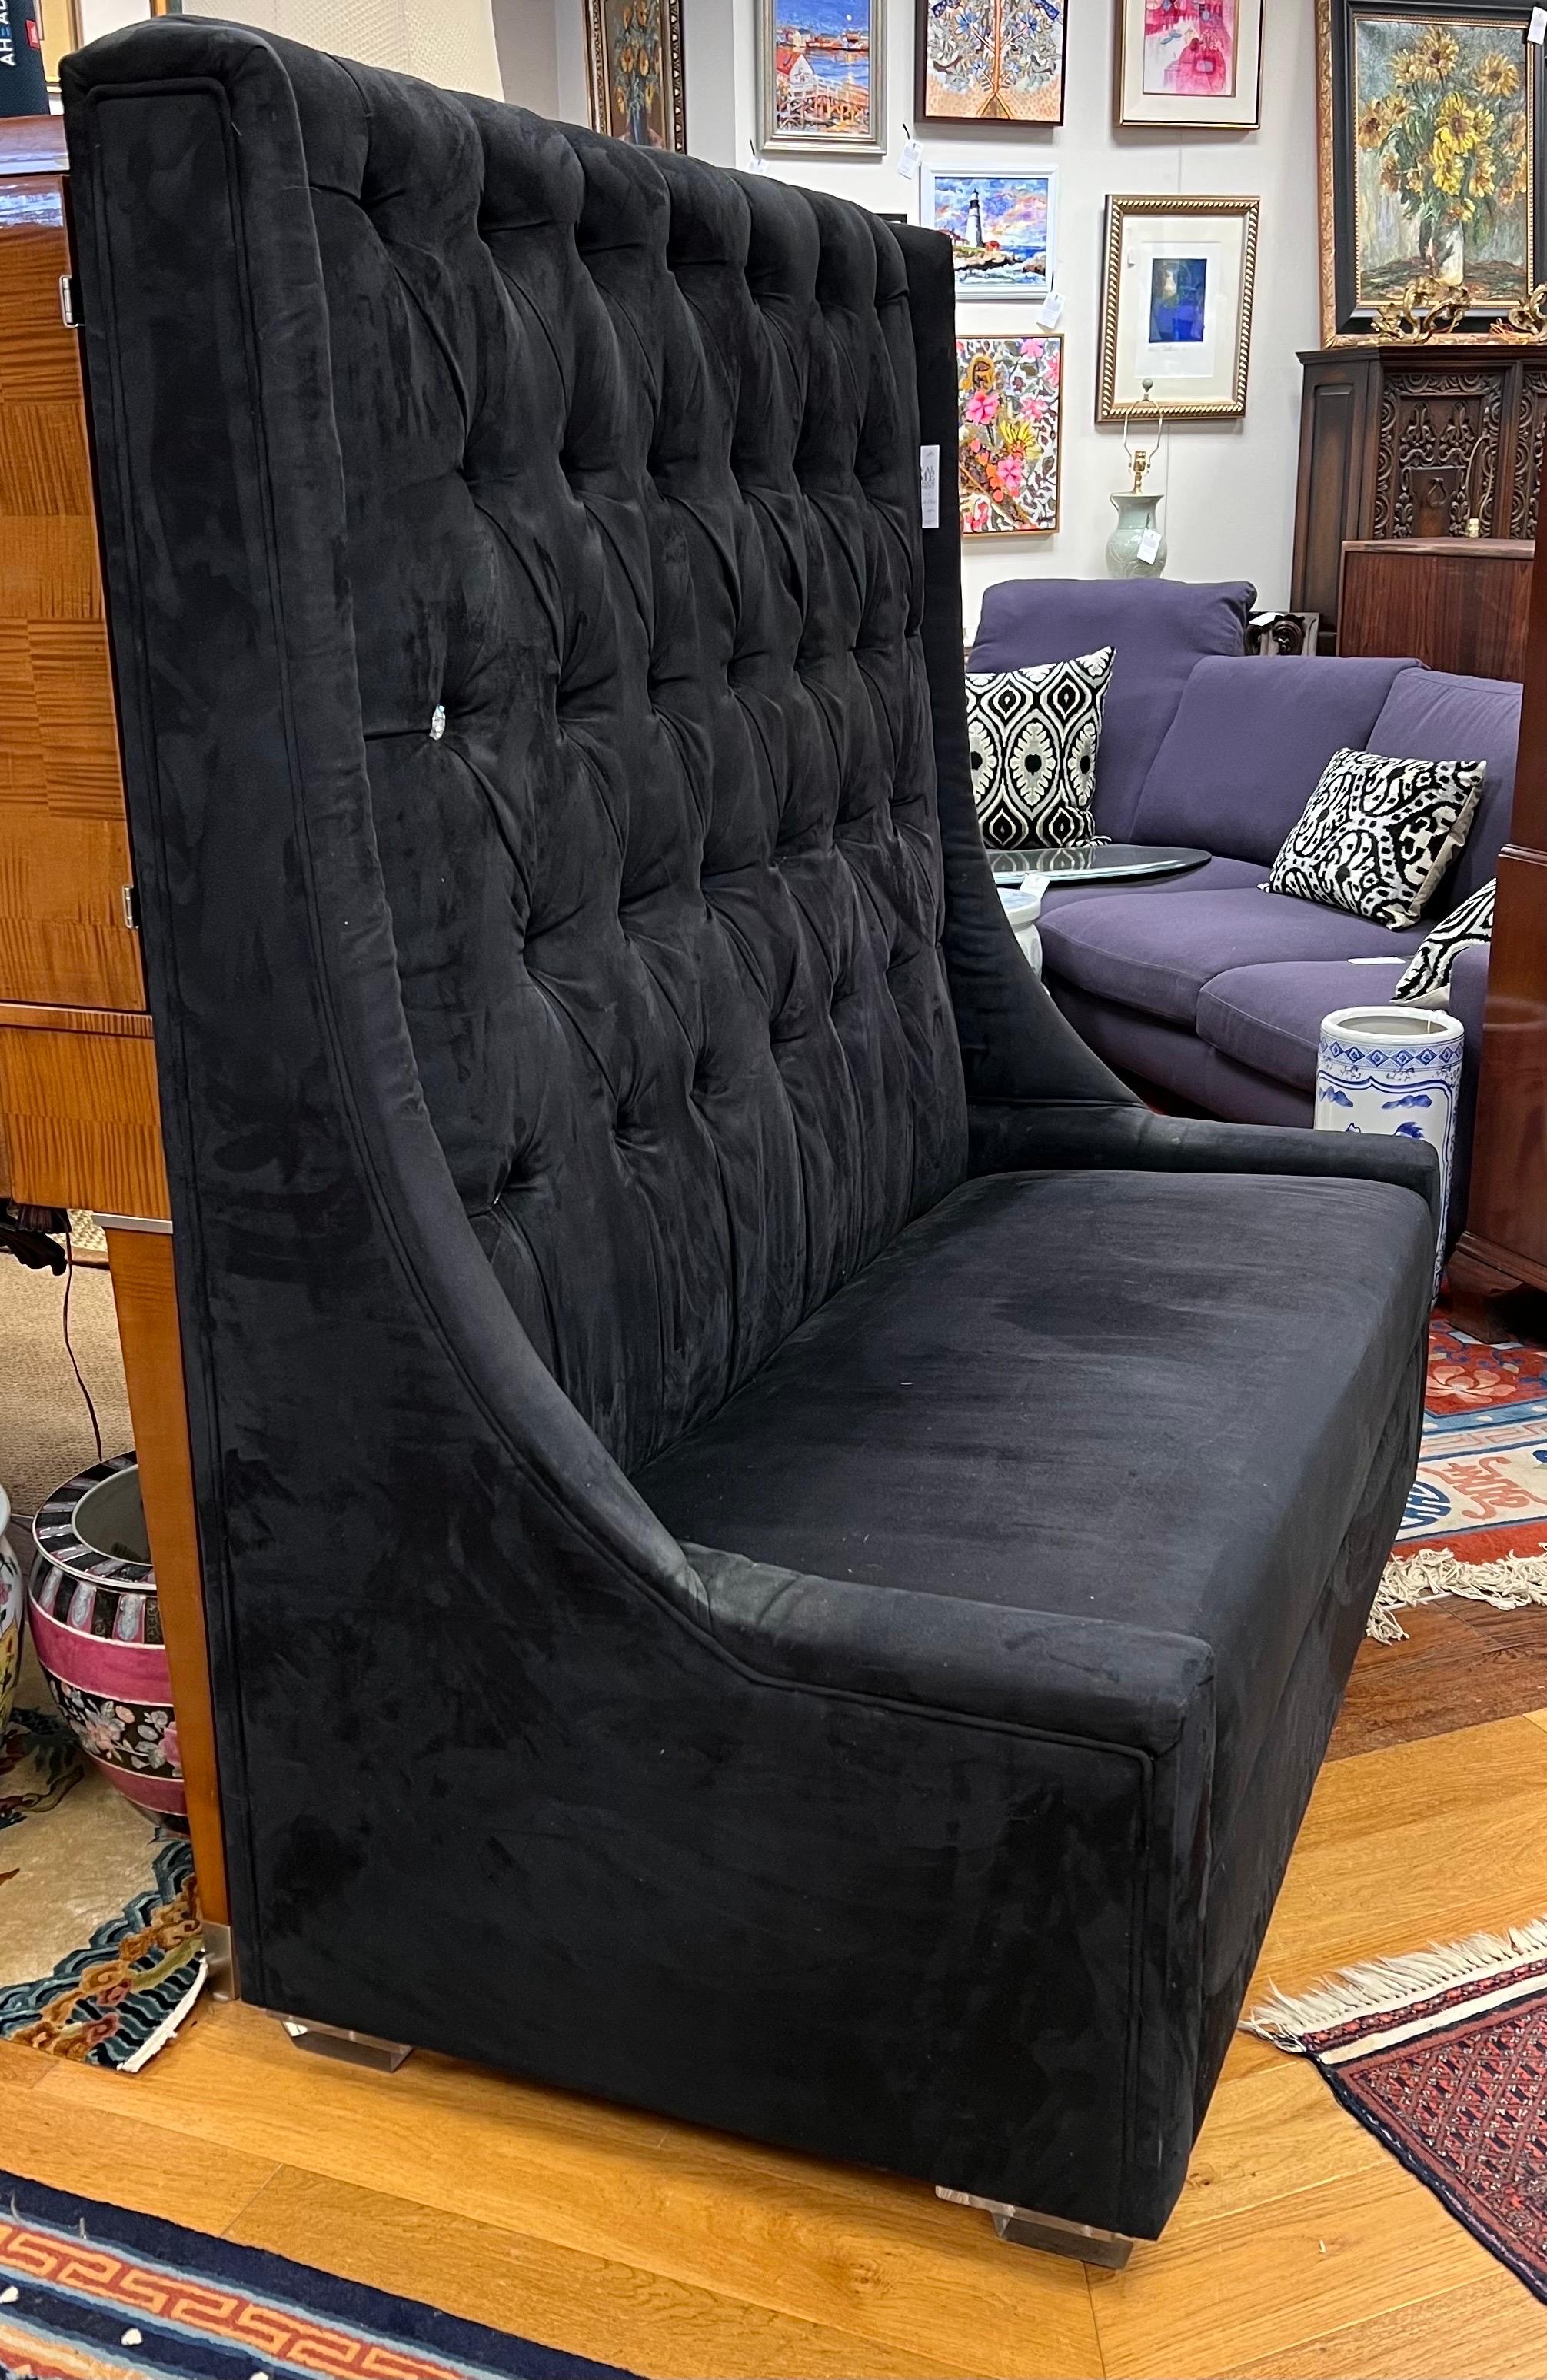 Contemporary Tall Tufted Black Suede Leather Settee Sofa Banquette Loveseat by Shlomo Haziza